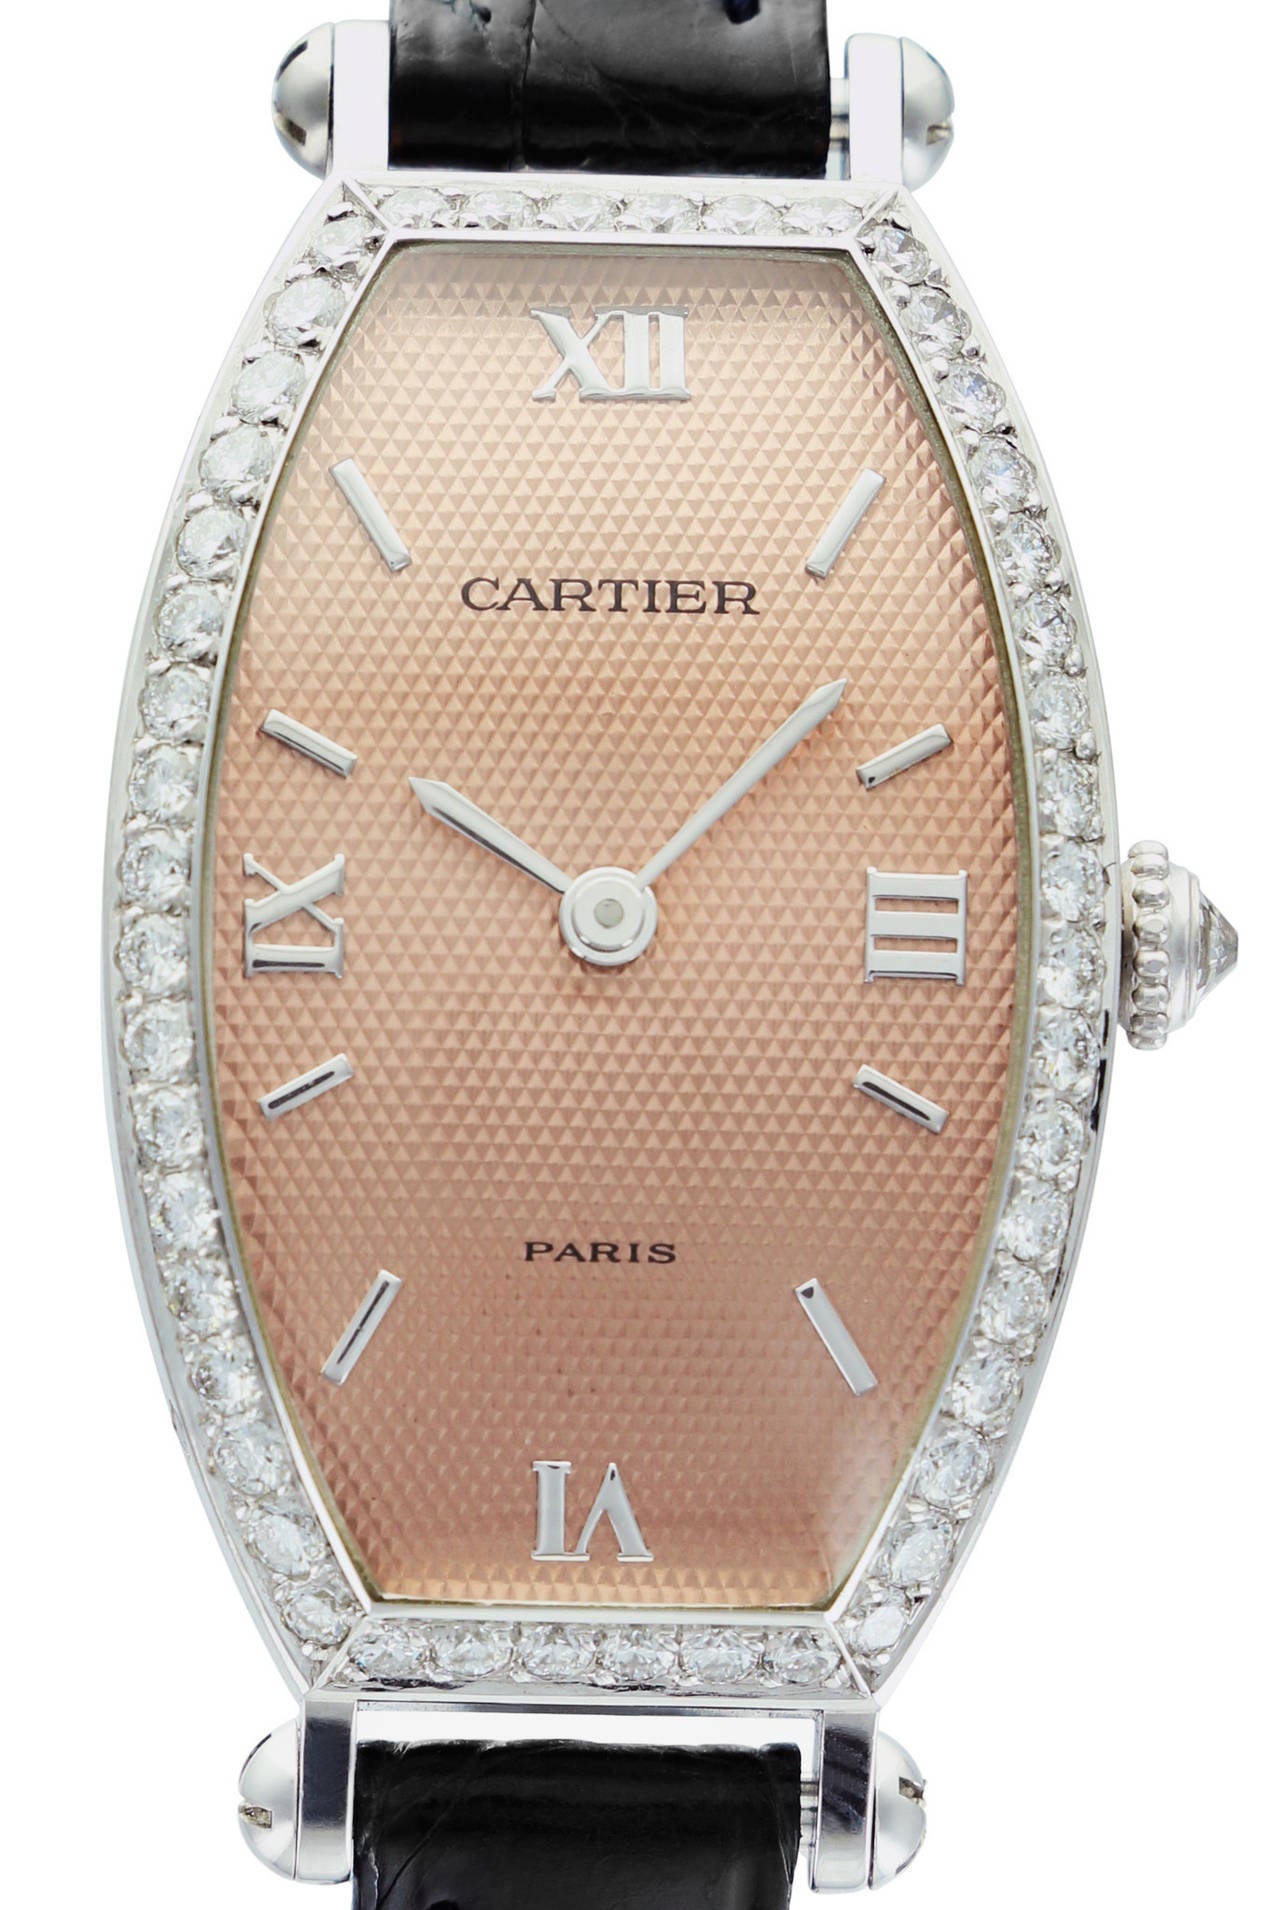 This very rare Cartier ladies watch has a beautiful salmon colored dial, white gold case and diamond bezel. It is truly an elegant masterpiece from a classic brand.